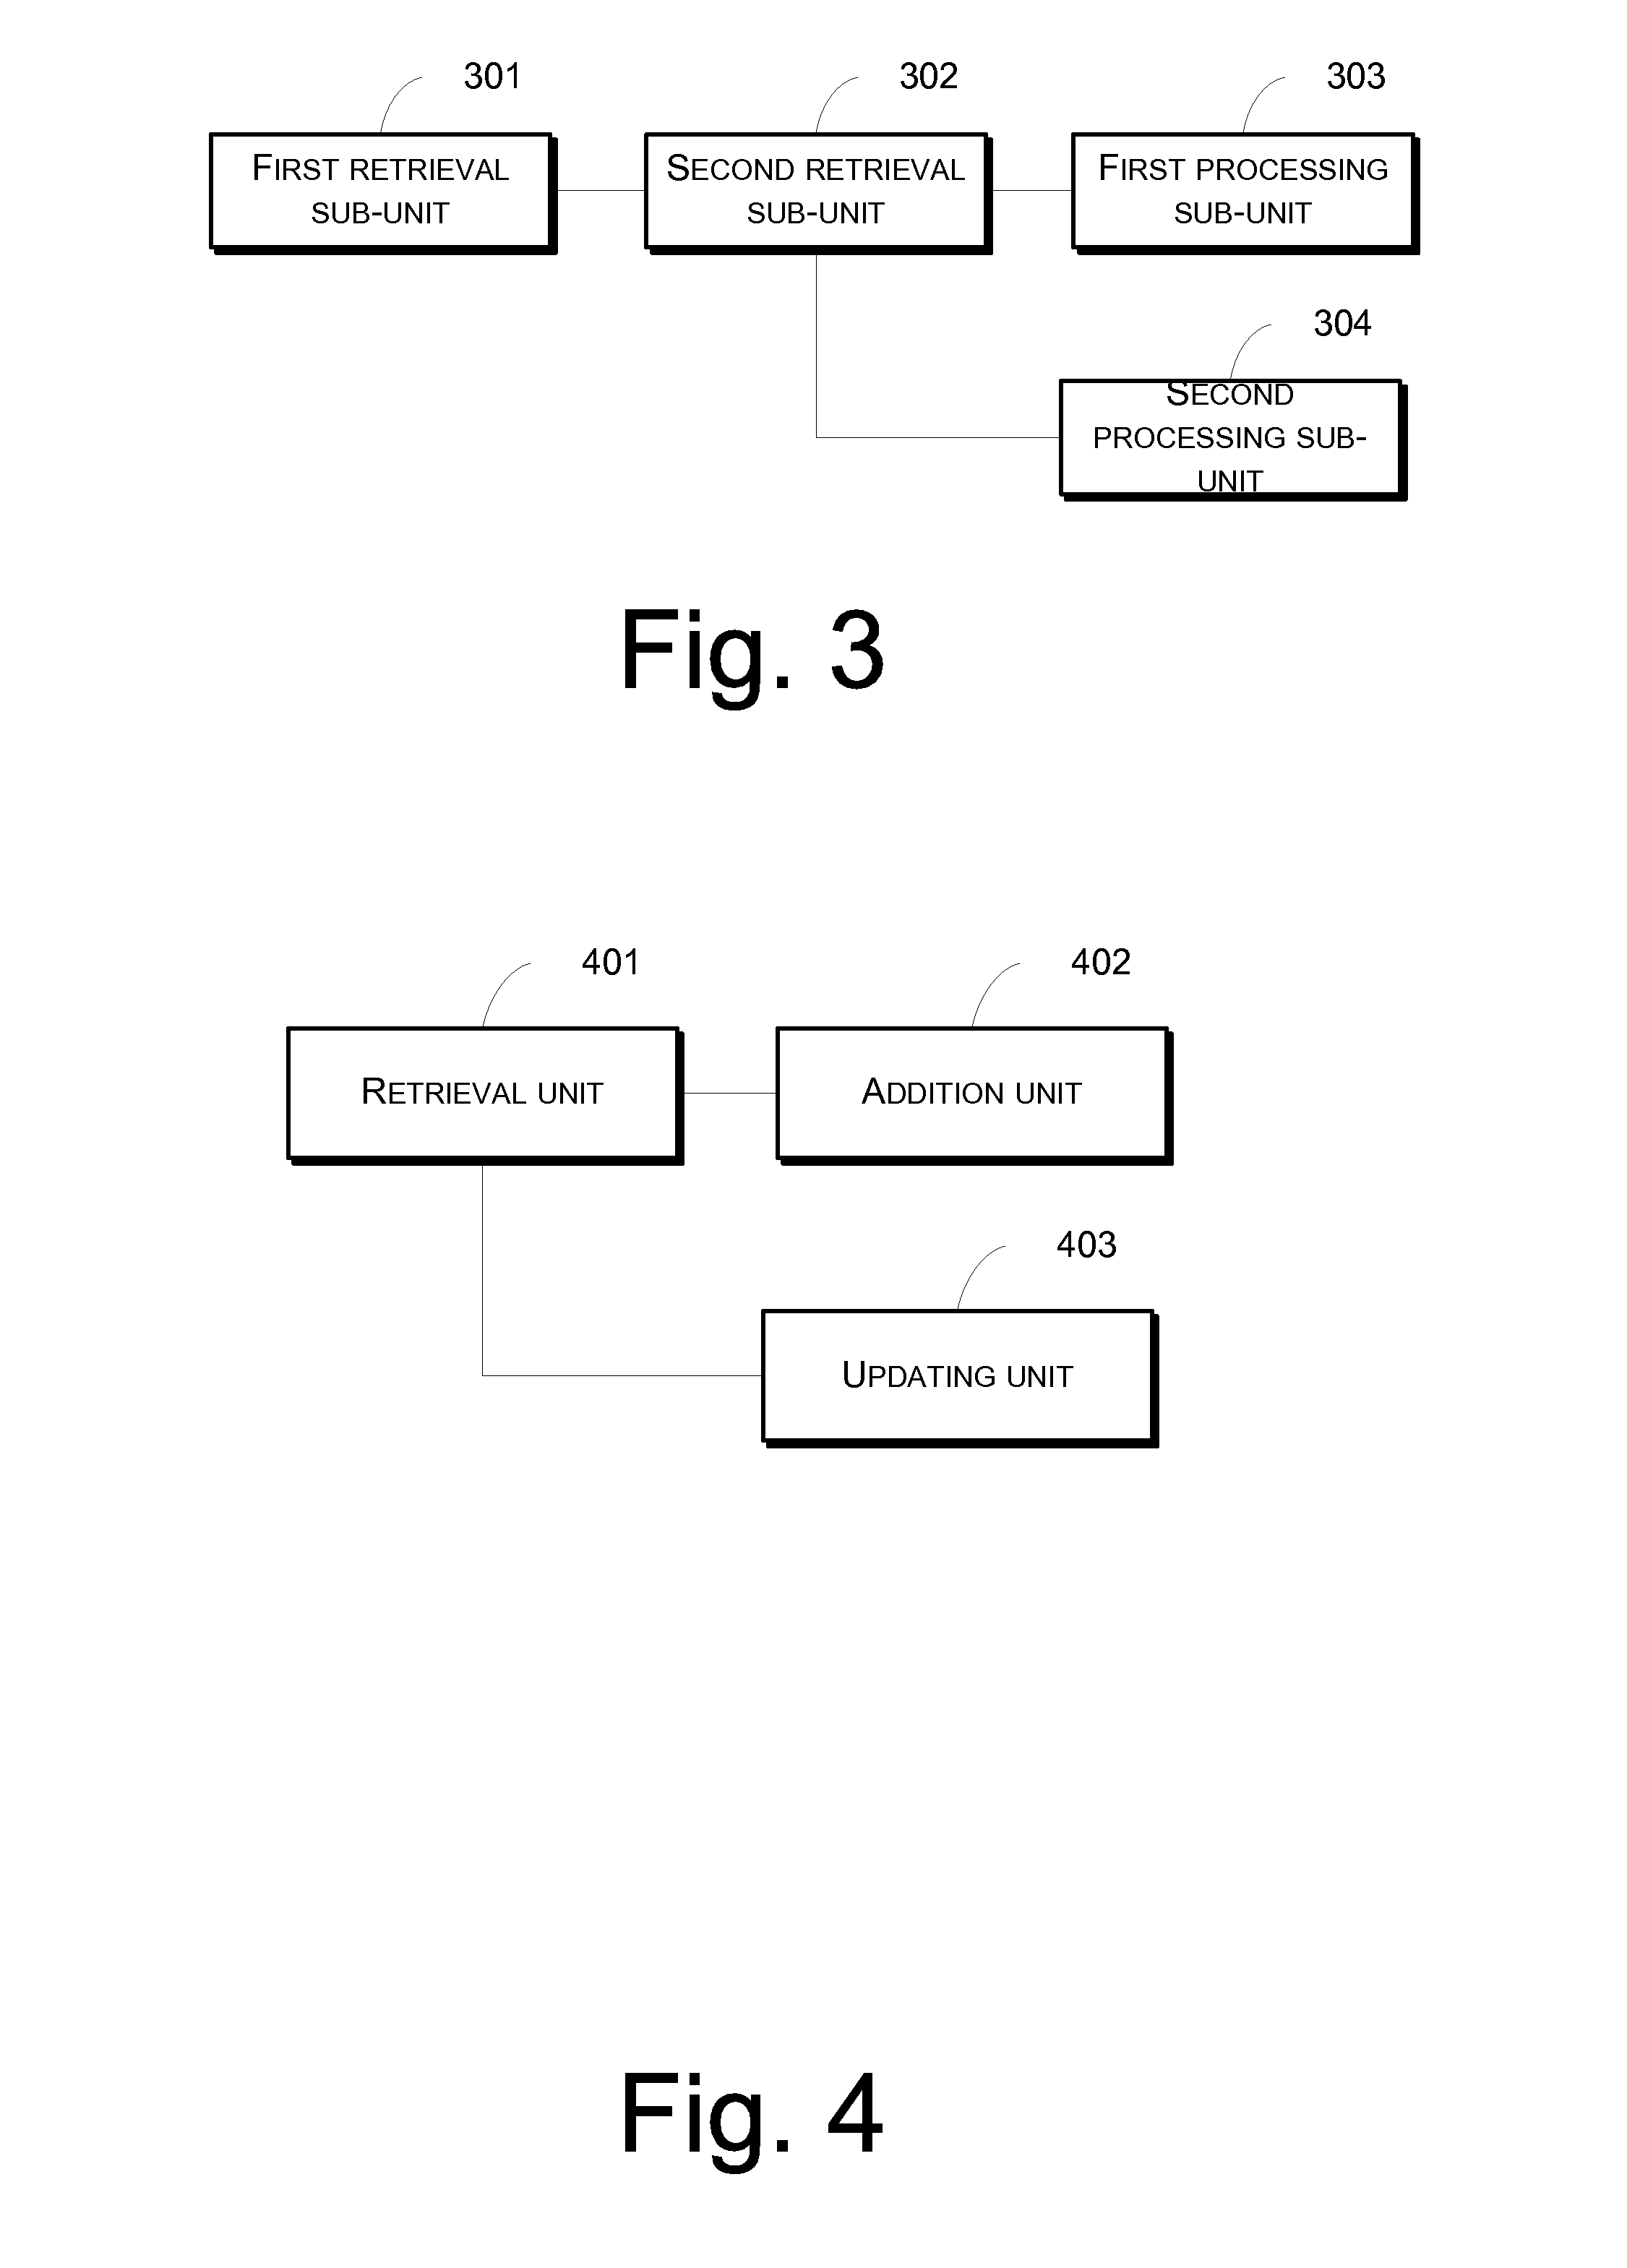 Apparatus and Method for Loading and Updating Codes of Cluster-Based Java Application System